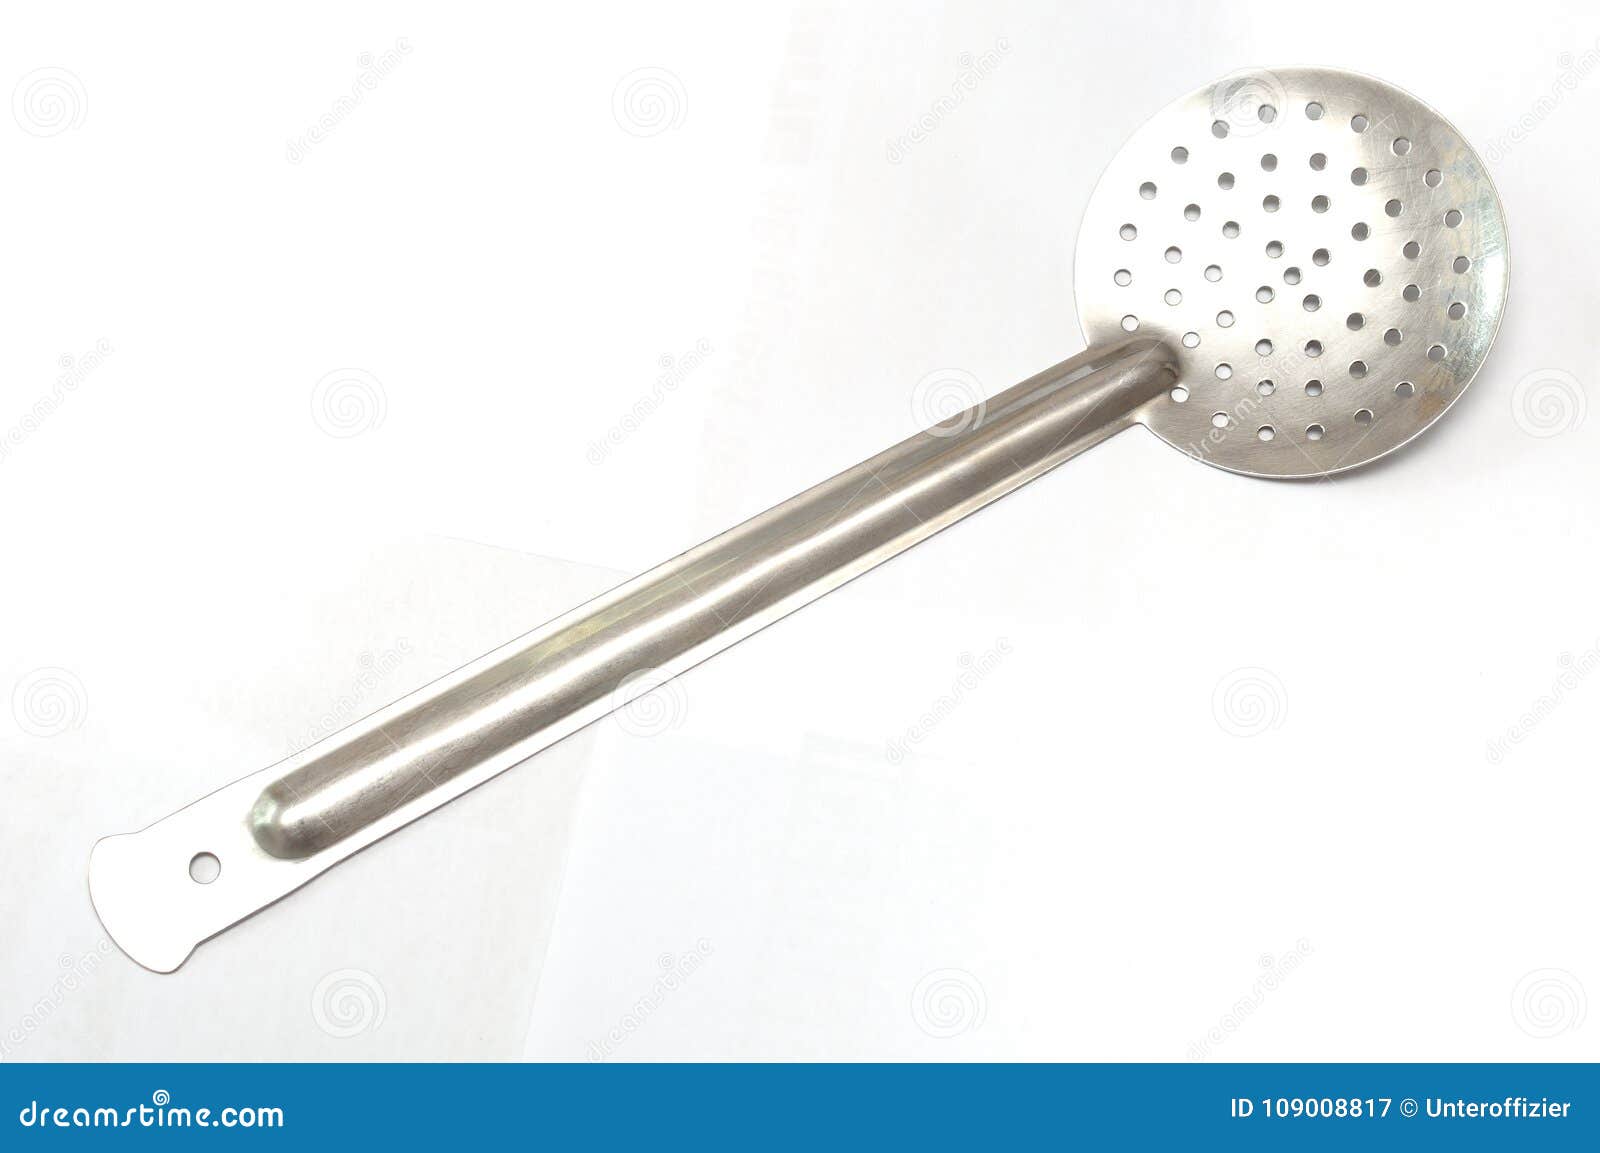 a stainless steel hot pot slotted spoon ladle